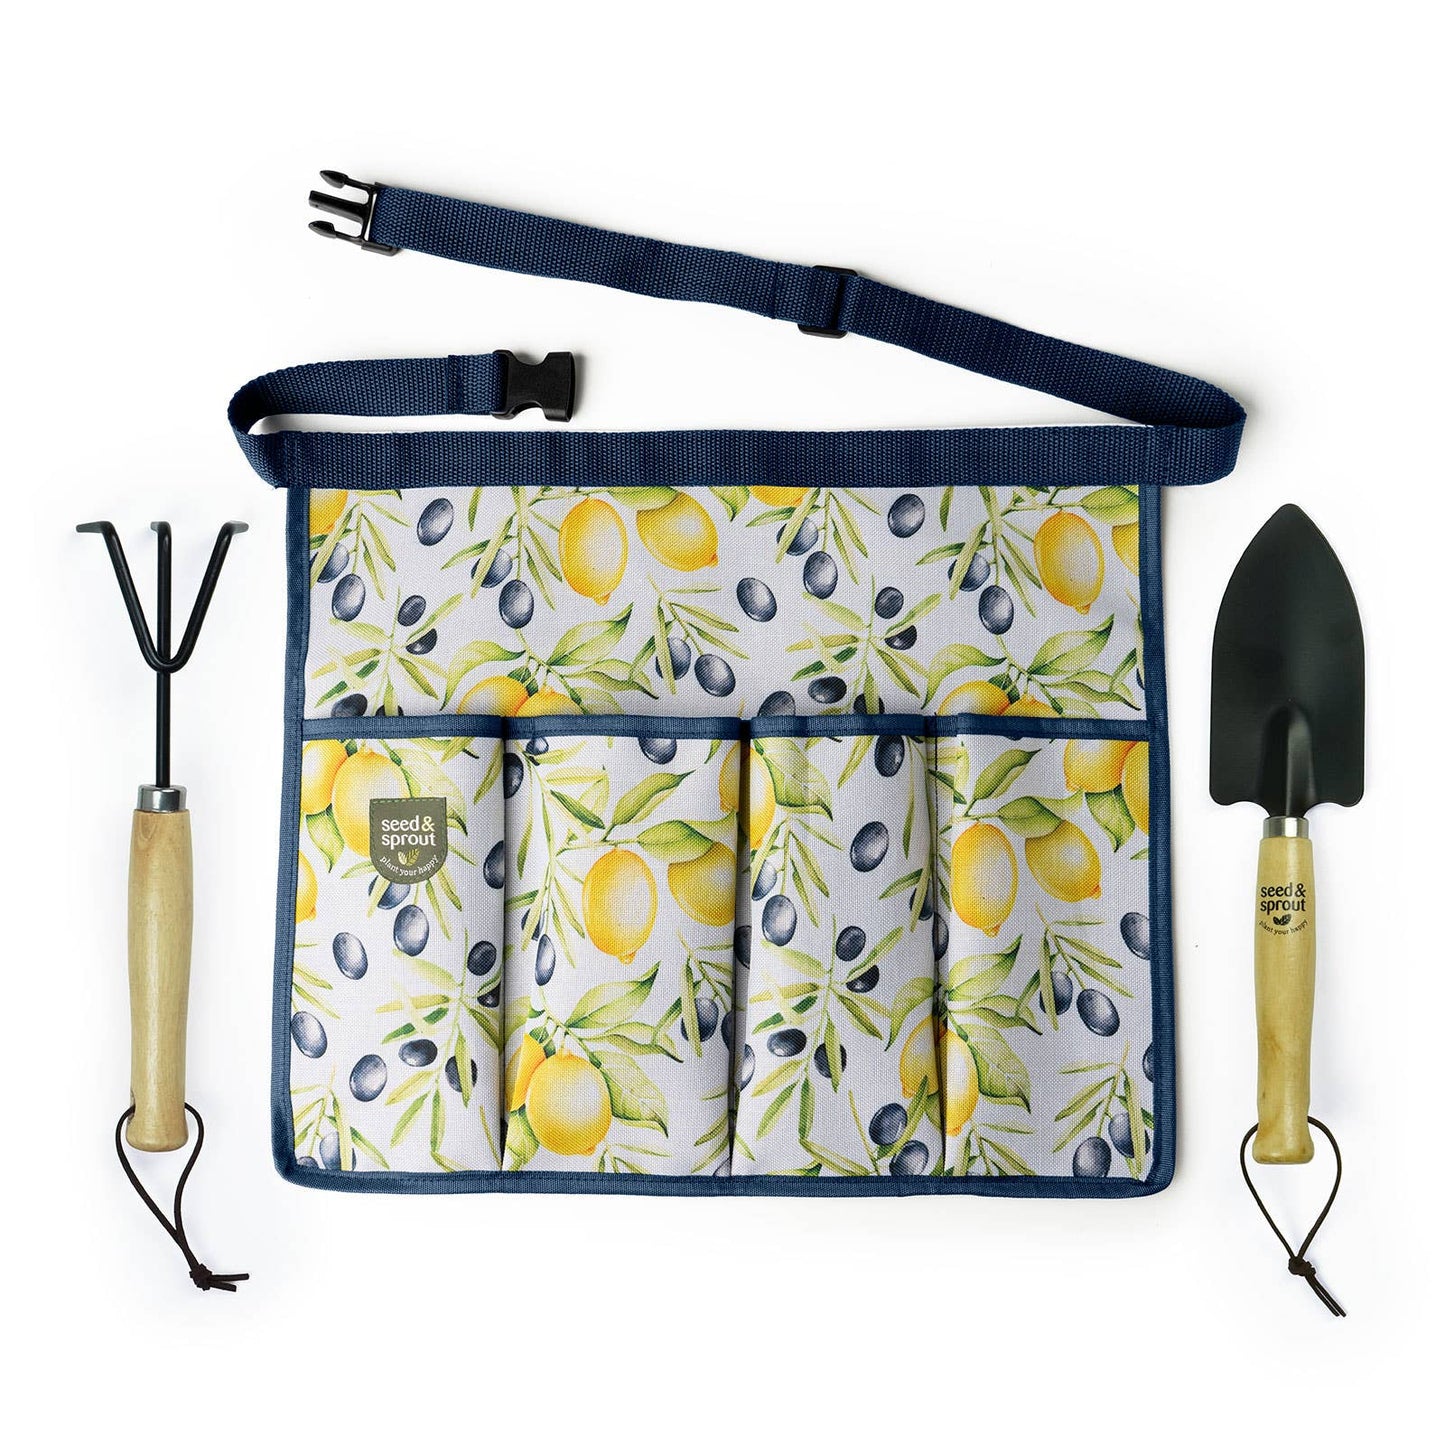 Seed & Sprout 3-Piece Gardening Set Southern Sweetness